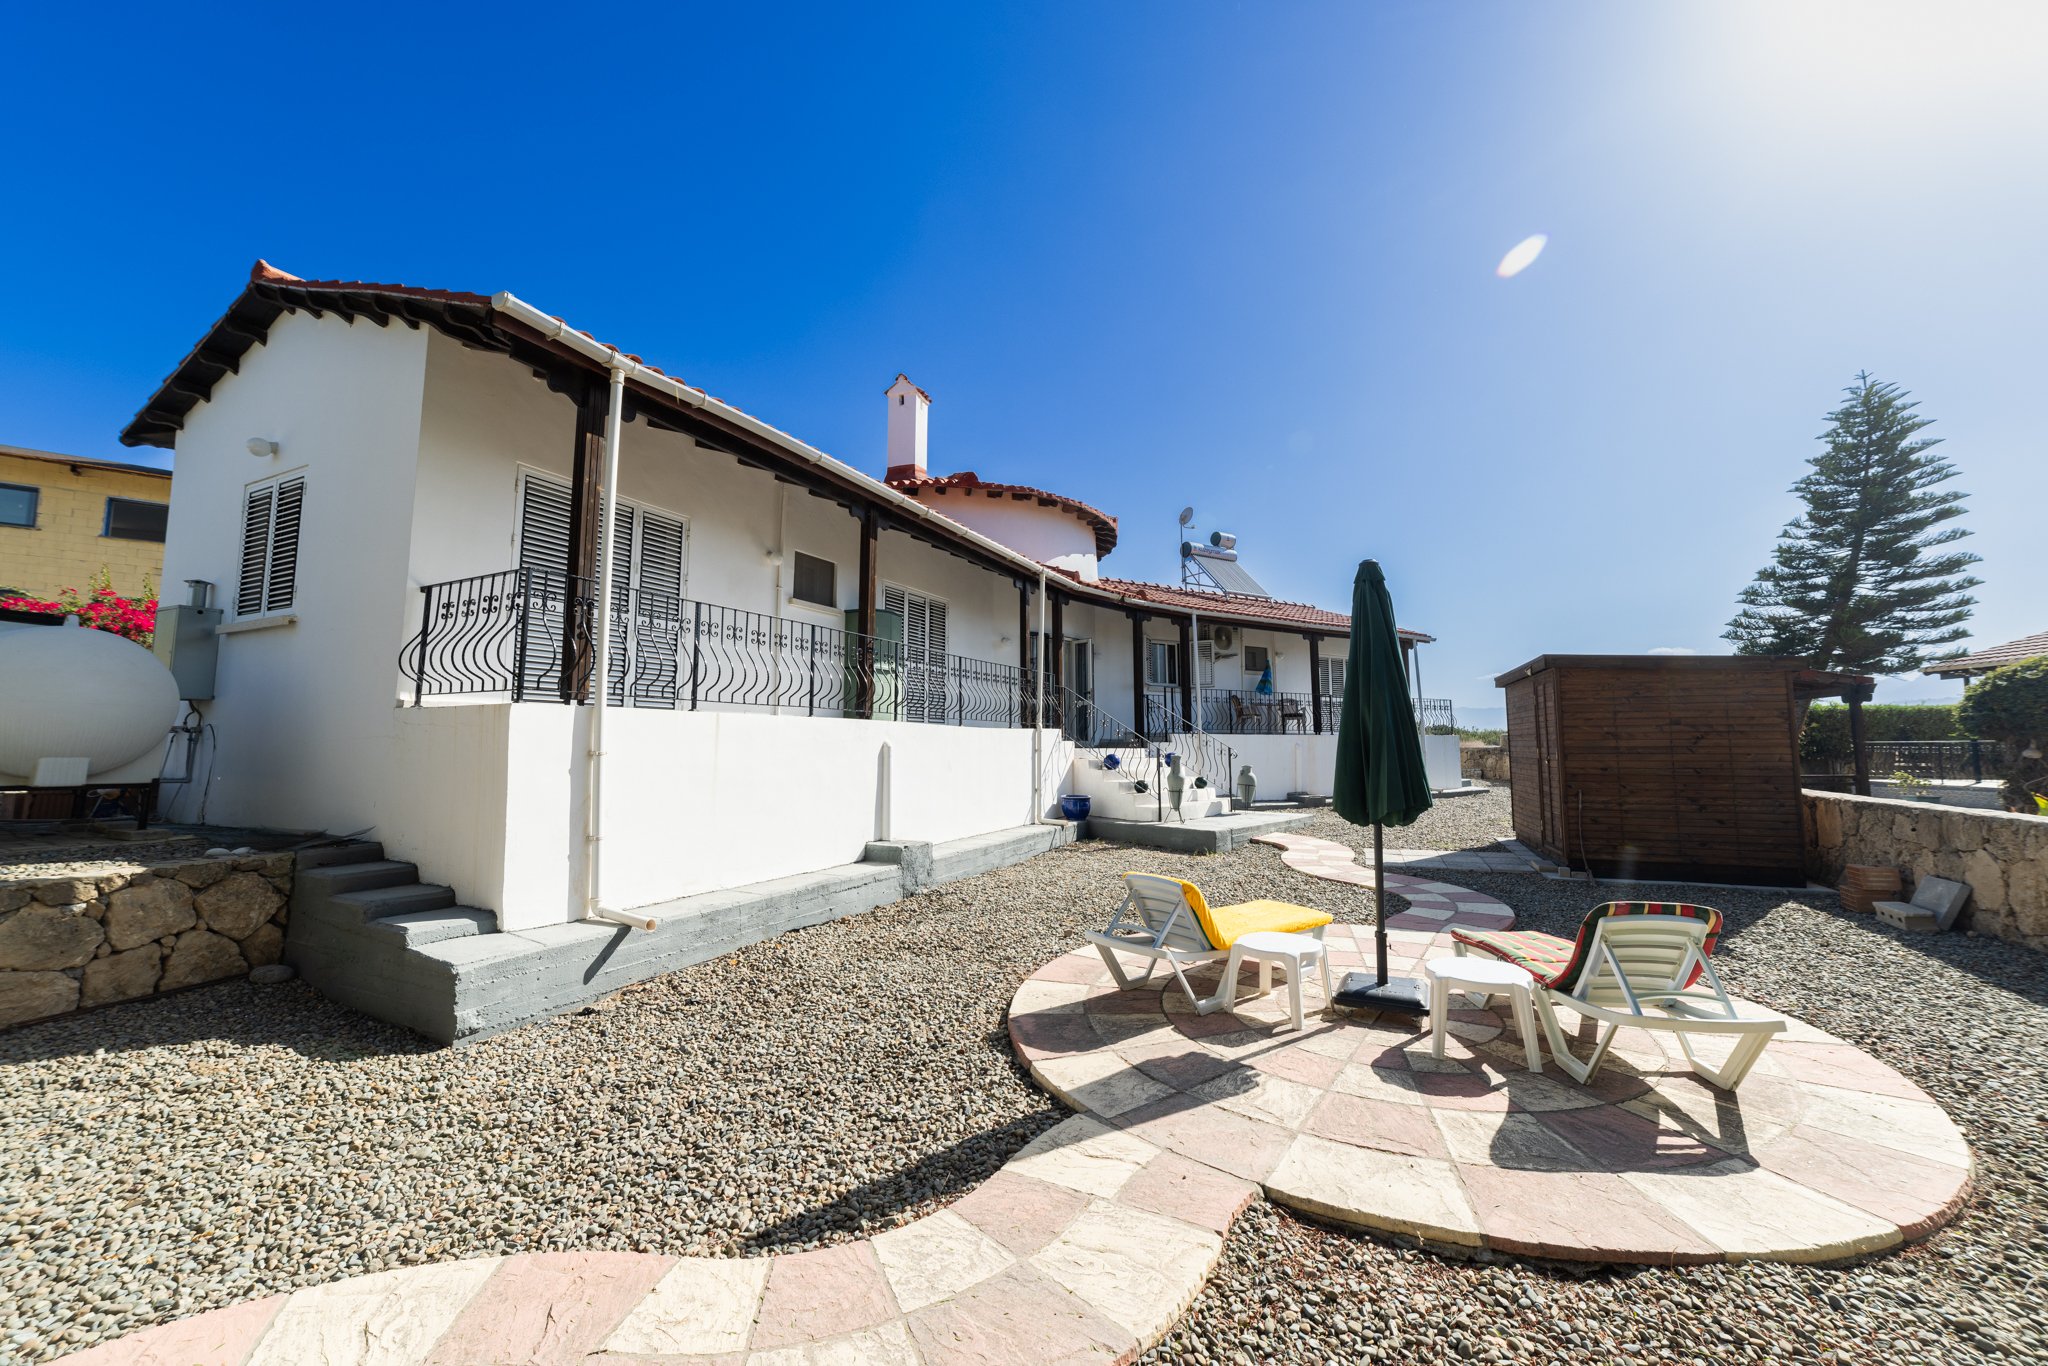 Coastal Bliss Awaits: 3-Bedroom Bungalow Walking Distance to the Sea, Catalkoy